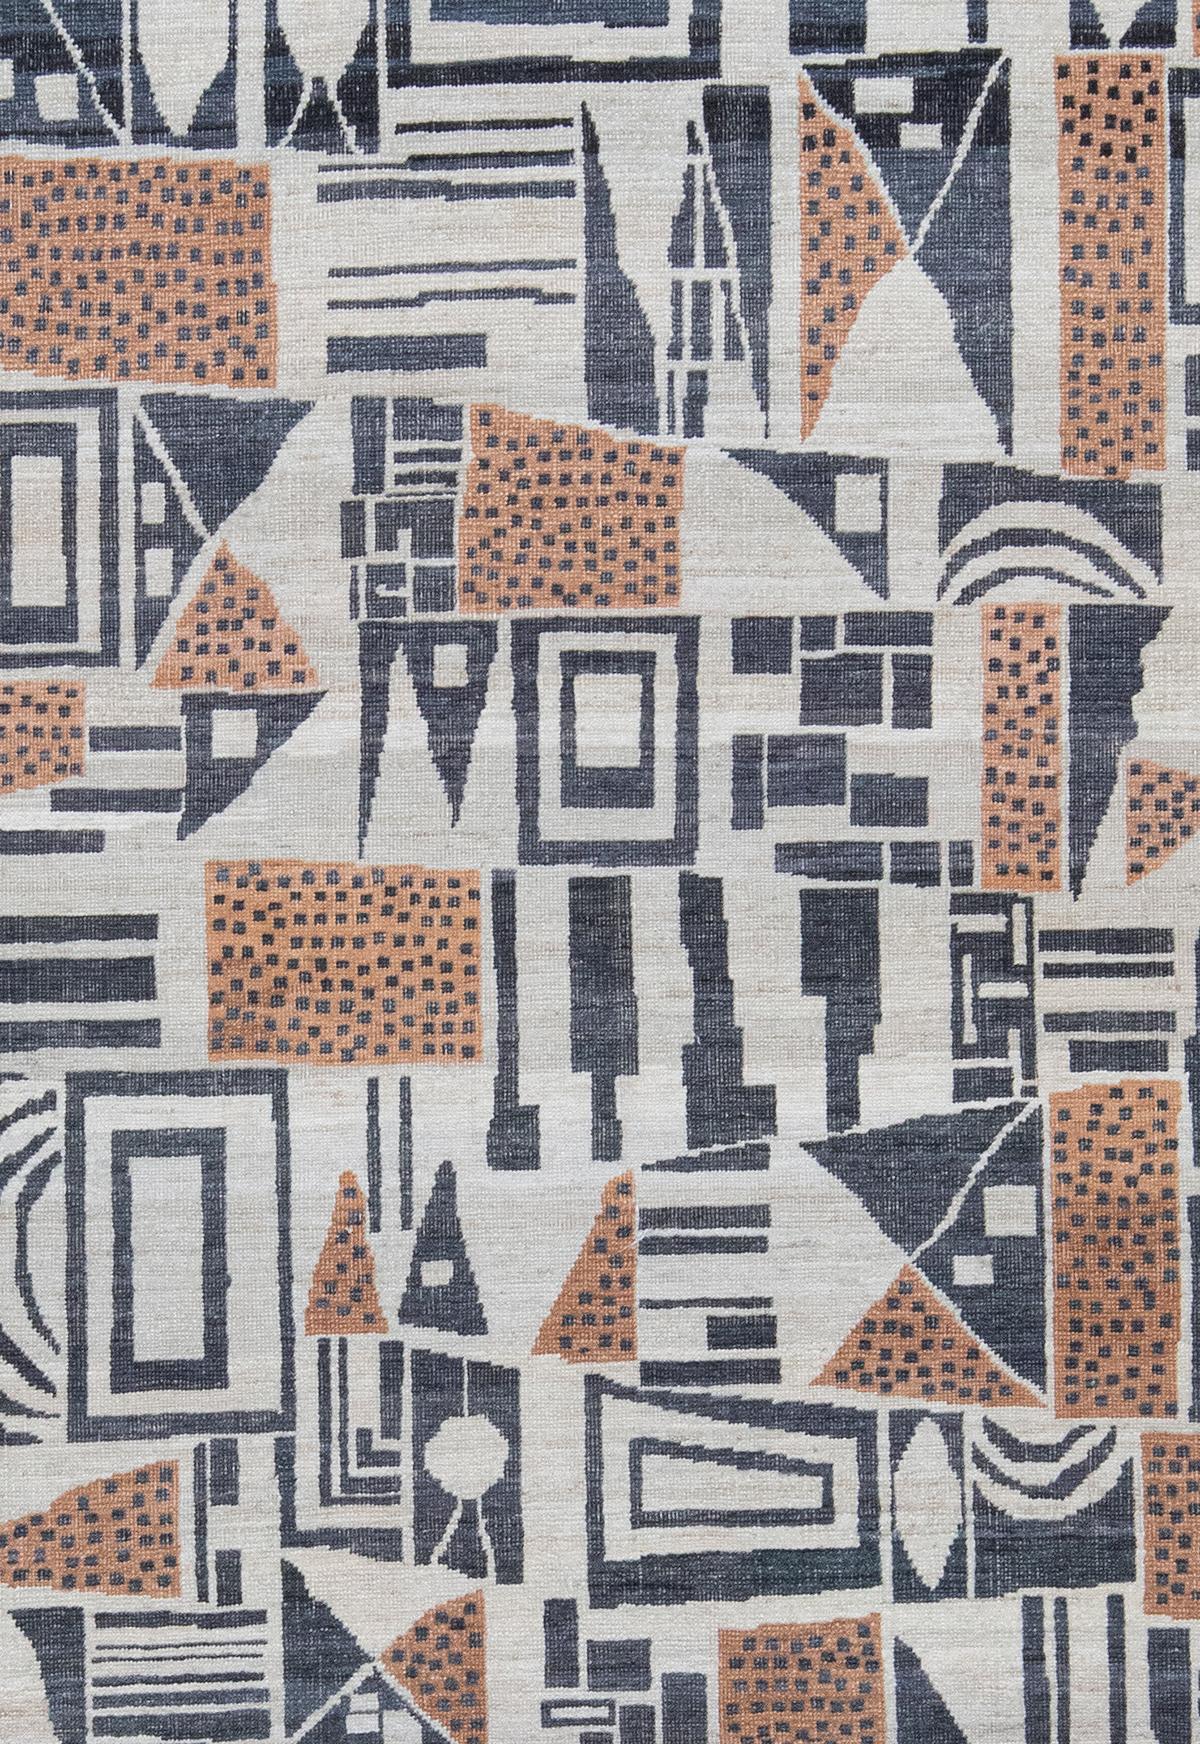 This cubist style Art Deco rug is styled after Zeki Muren, who is a multidisciplinary Turkish artist, known for his bold, geometric, and whimsical designs. The harmonious pairing of color and pattern evokes a melodious feel. This rug features a